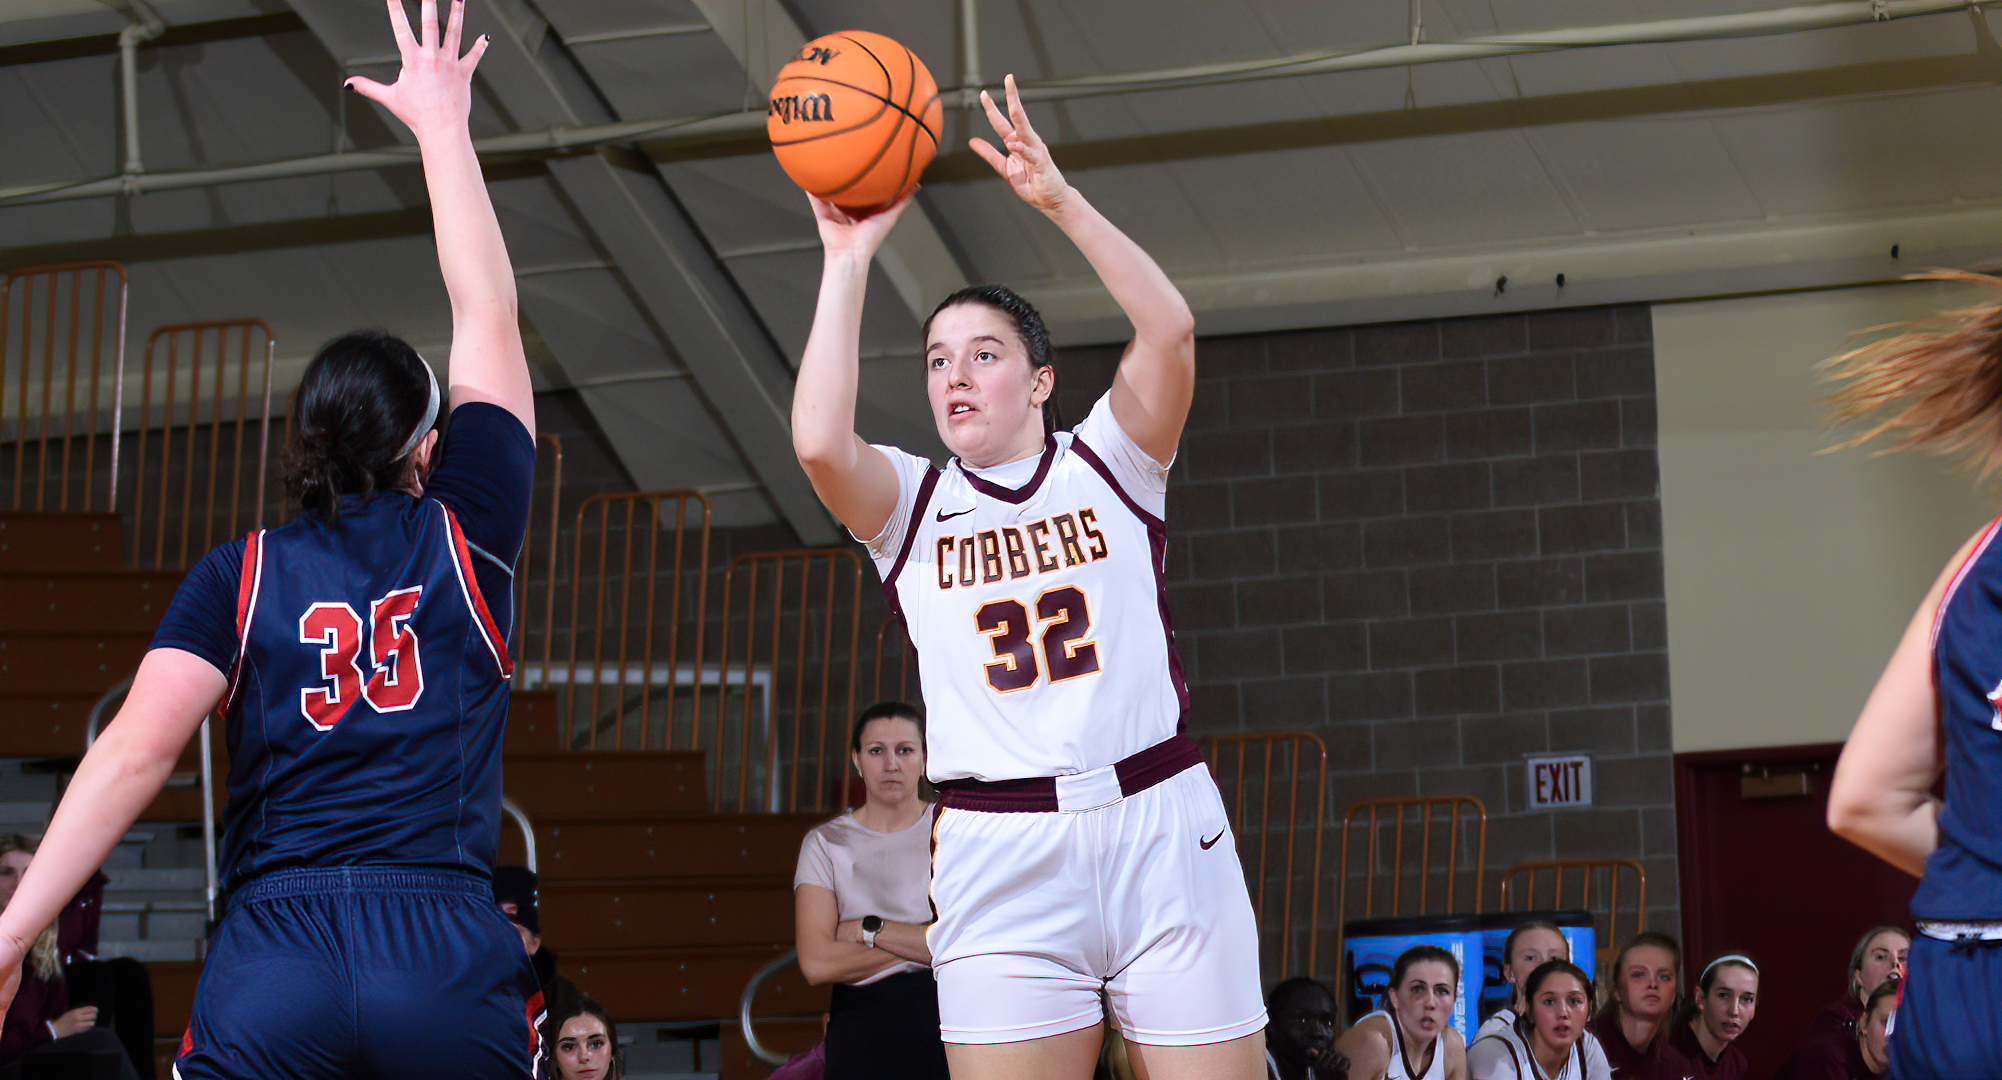 Greta Tollefson was one of four Cobbers who scored in double figures in CC's win at Carleton. She finished with 10 points in 16 minutes of play.